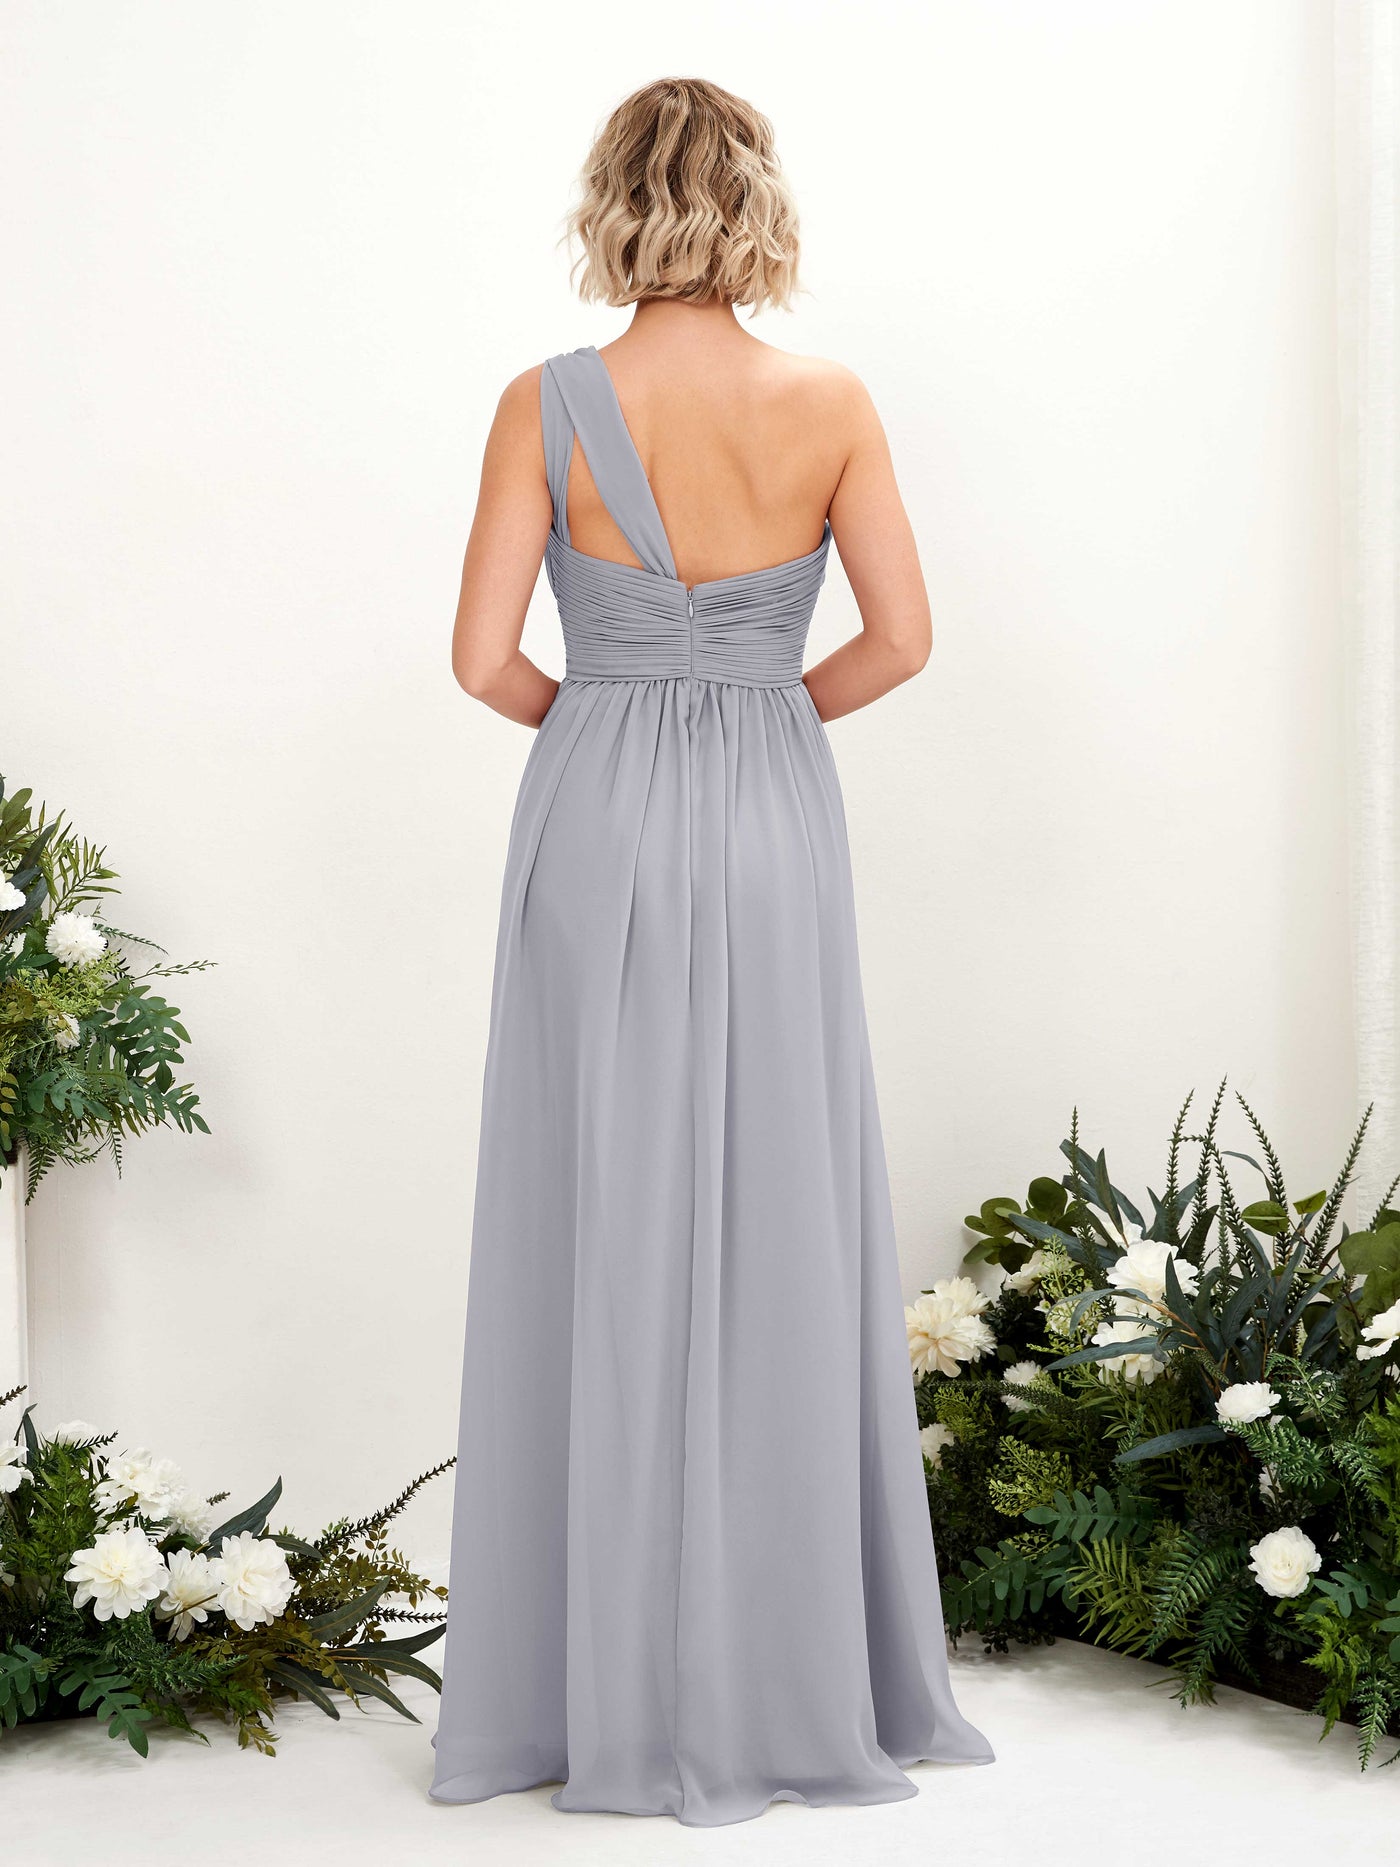 Dusty Lavender Bridesmaid Dresses Bridesmaid Dress Ball Gown Chiffon One Shoulder Full Length Sleeveless Wedding Party Dress (81225003)#color_dusty-lavender